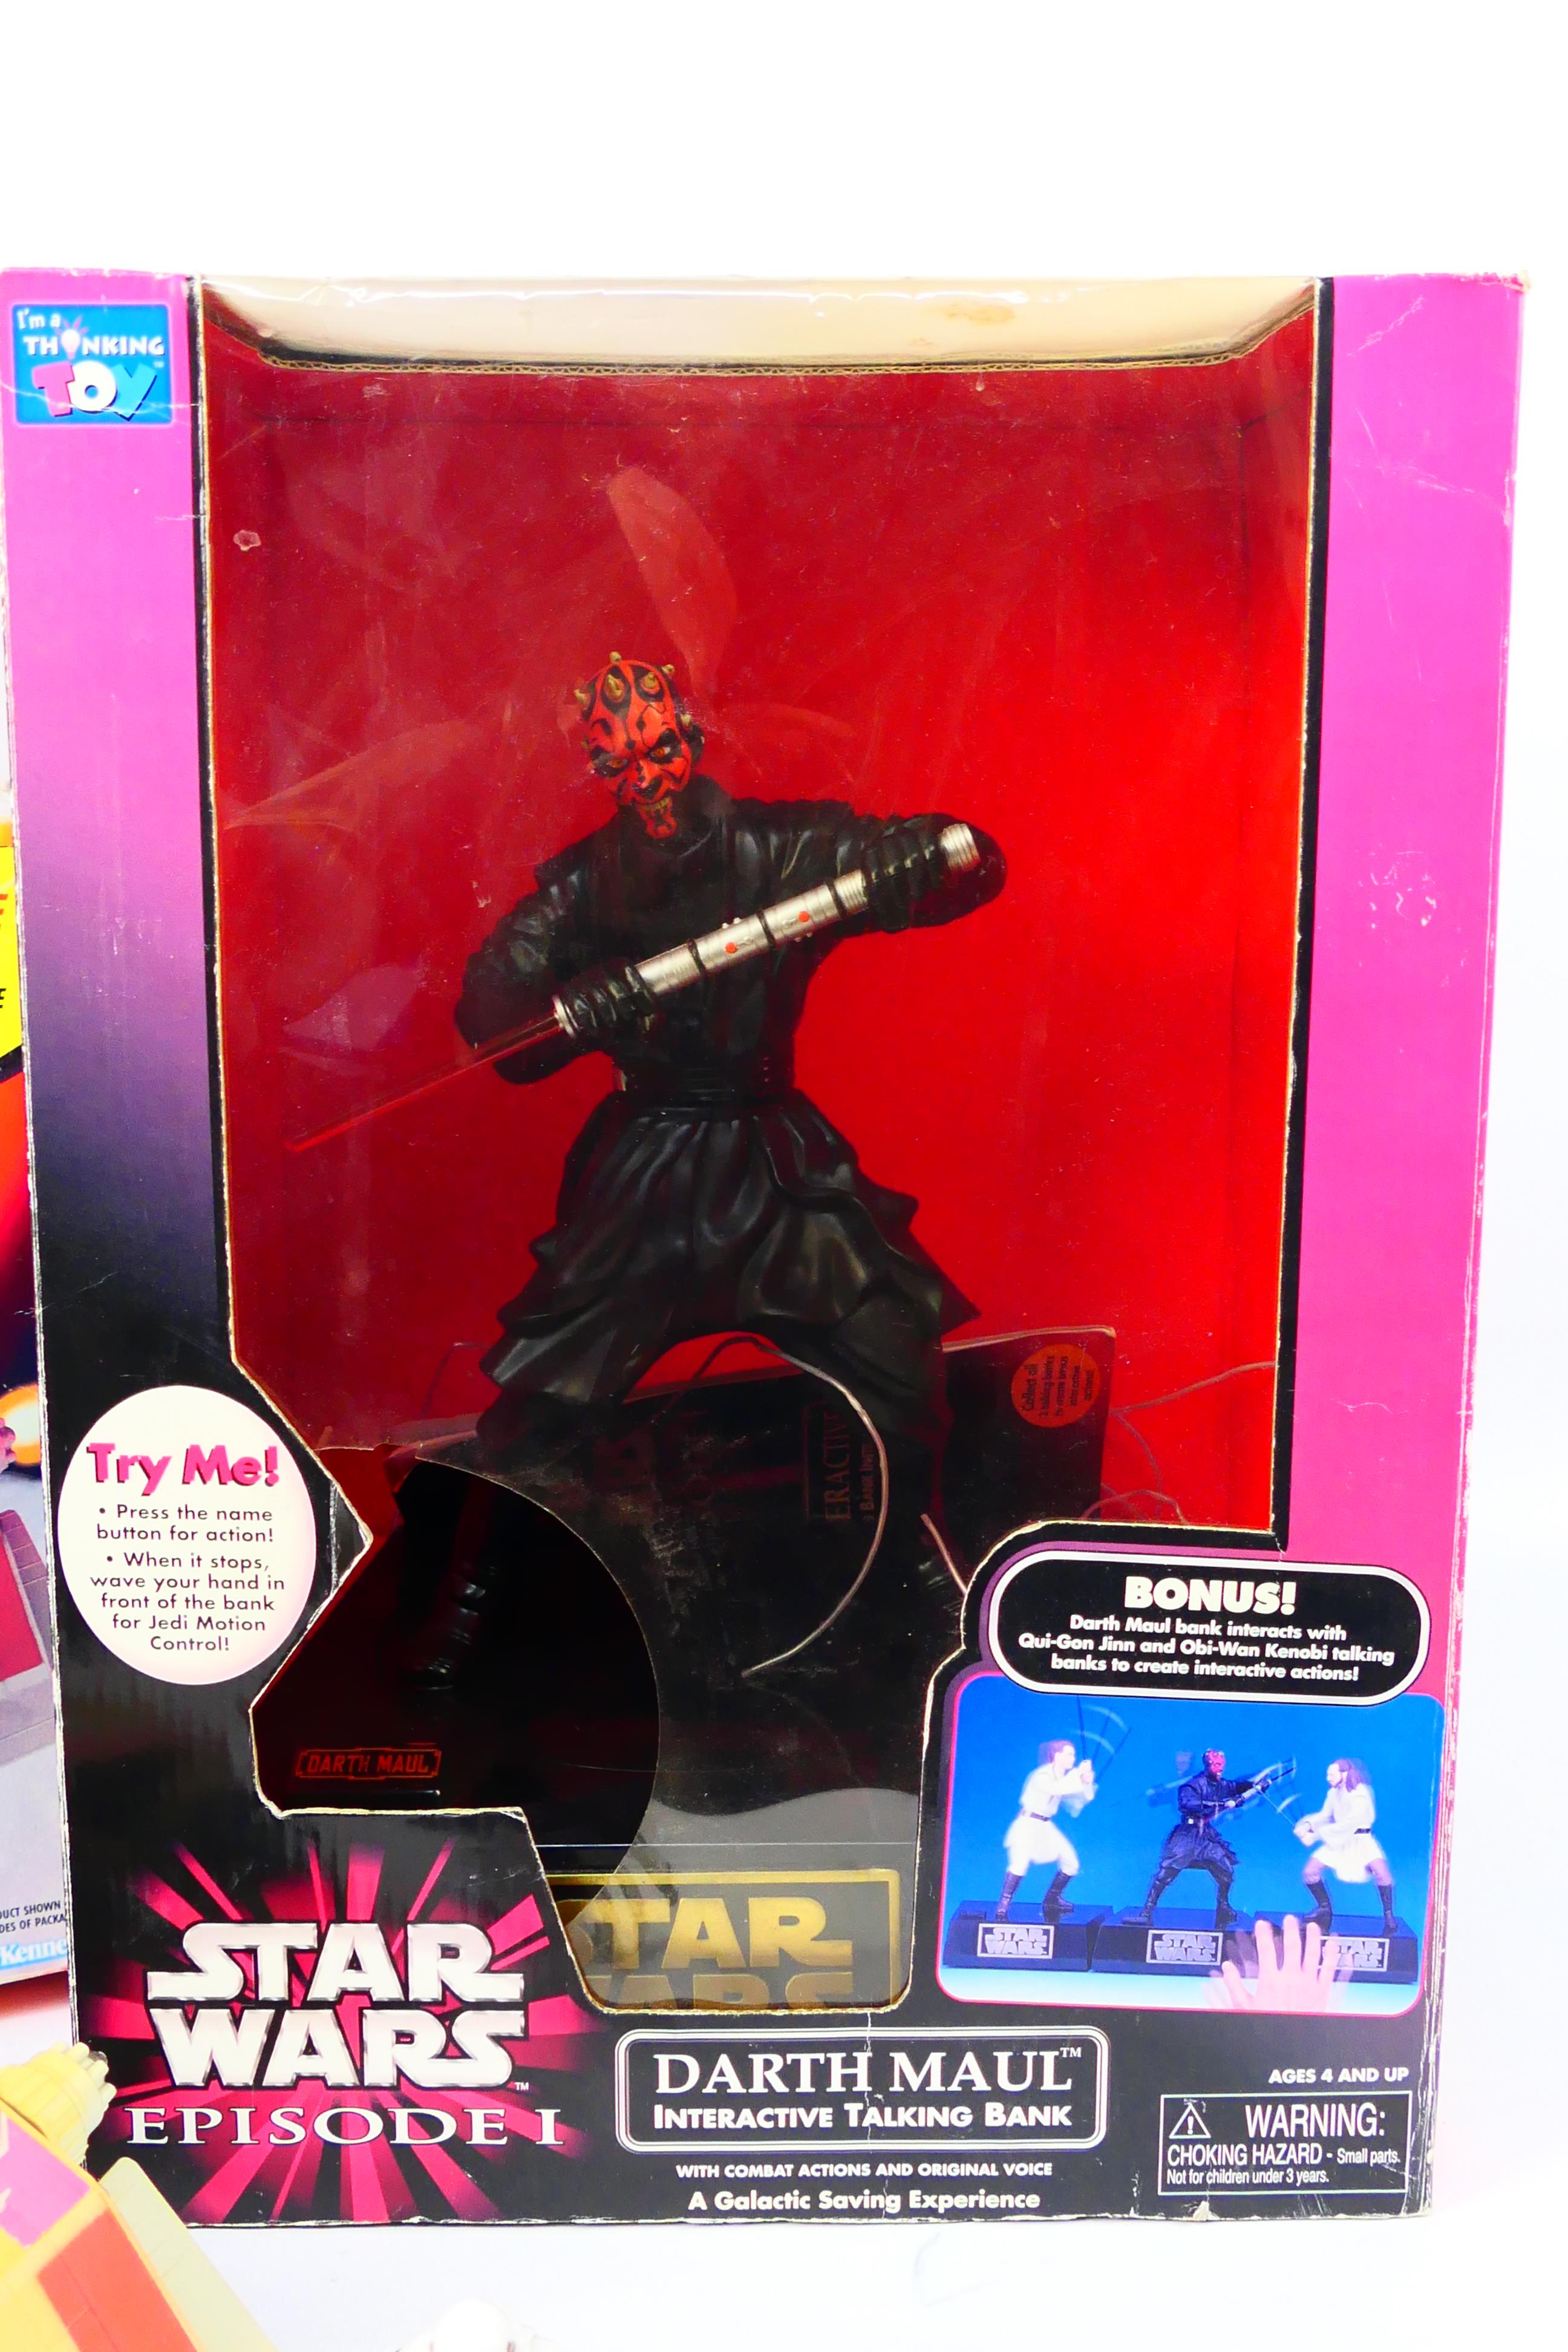 Think Way - Kenner - Star Wars - A Star Wars Episode one Darth Maul Interactive Taking Bank and A - Image 2 of 5